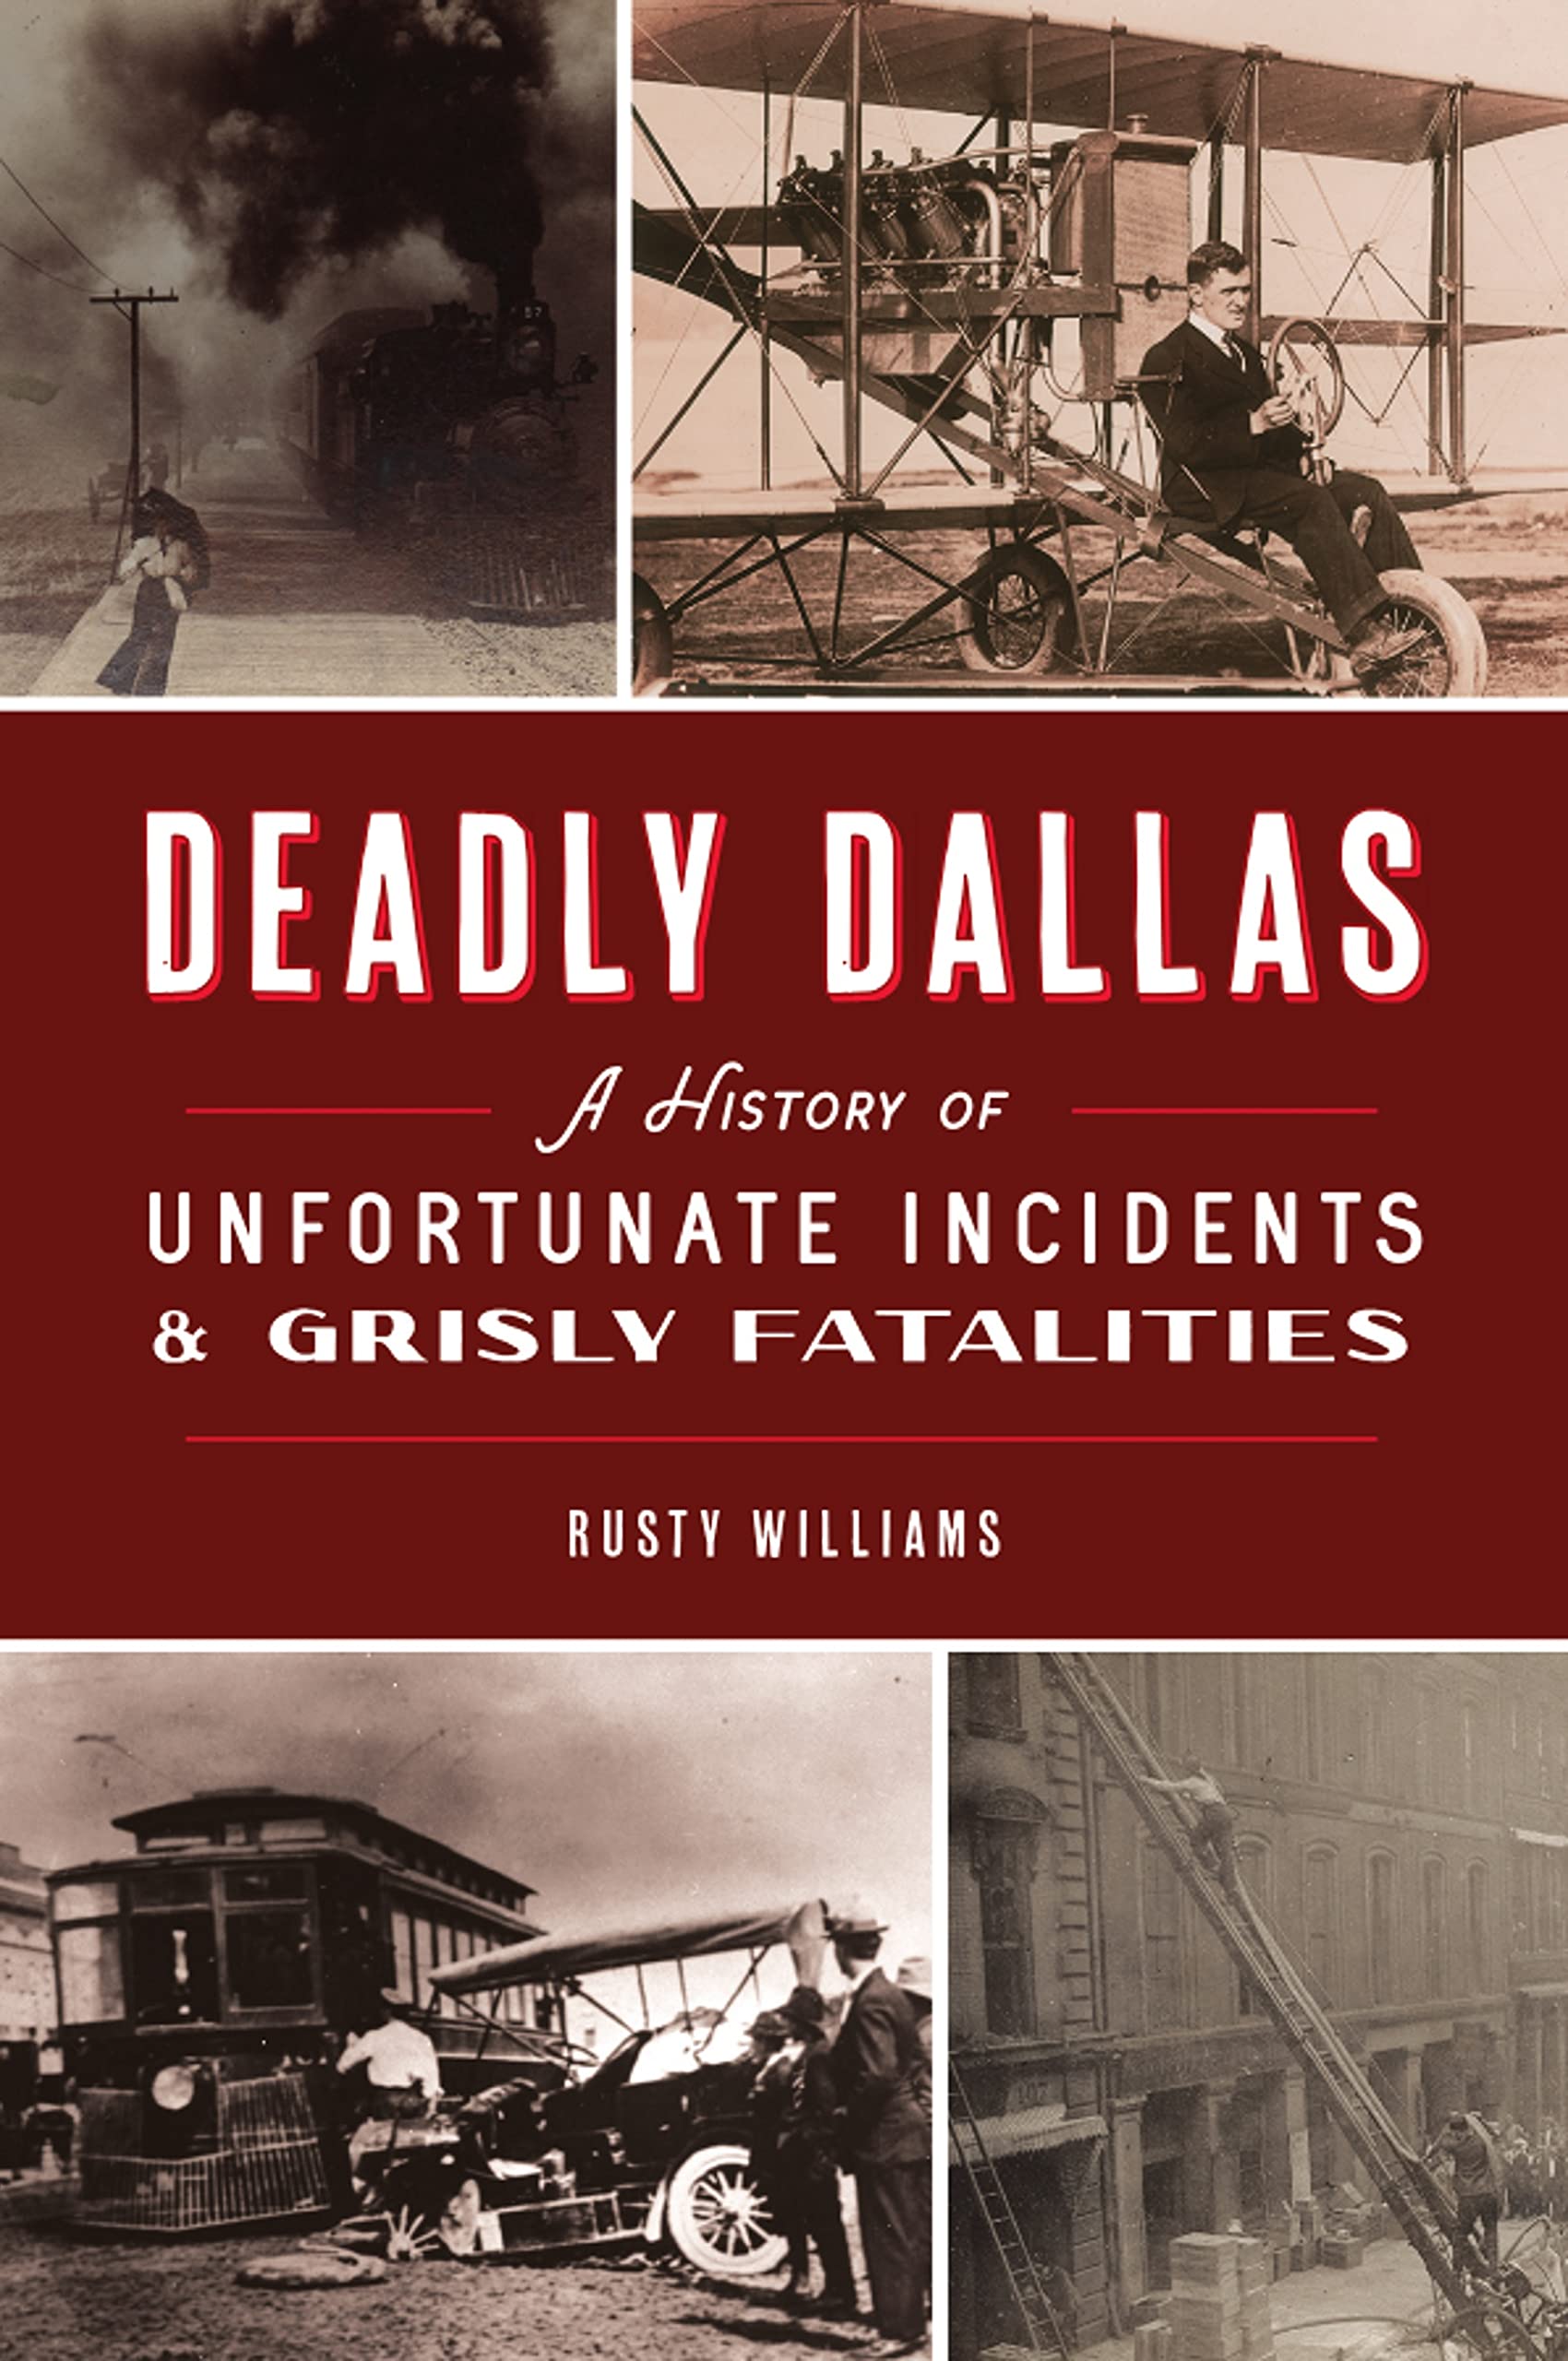 Deadly Dallas: A History of Unfortunate Incidents and Grisly Fatalities by Rusty Williams